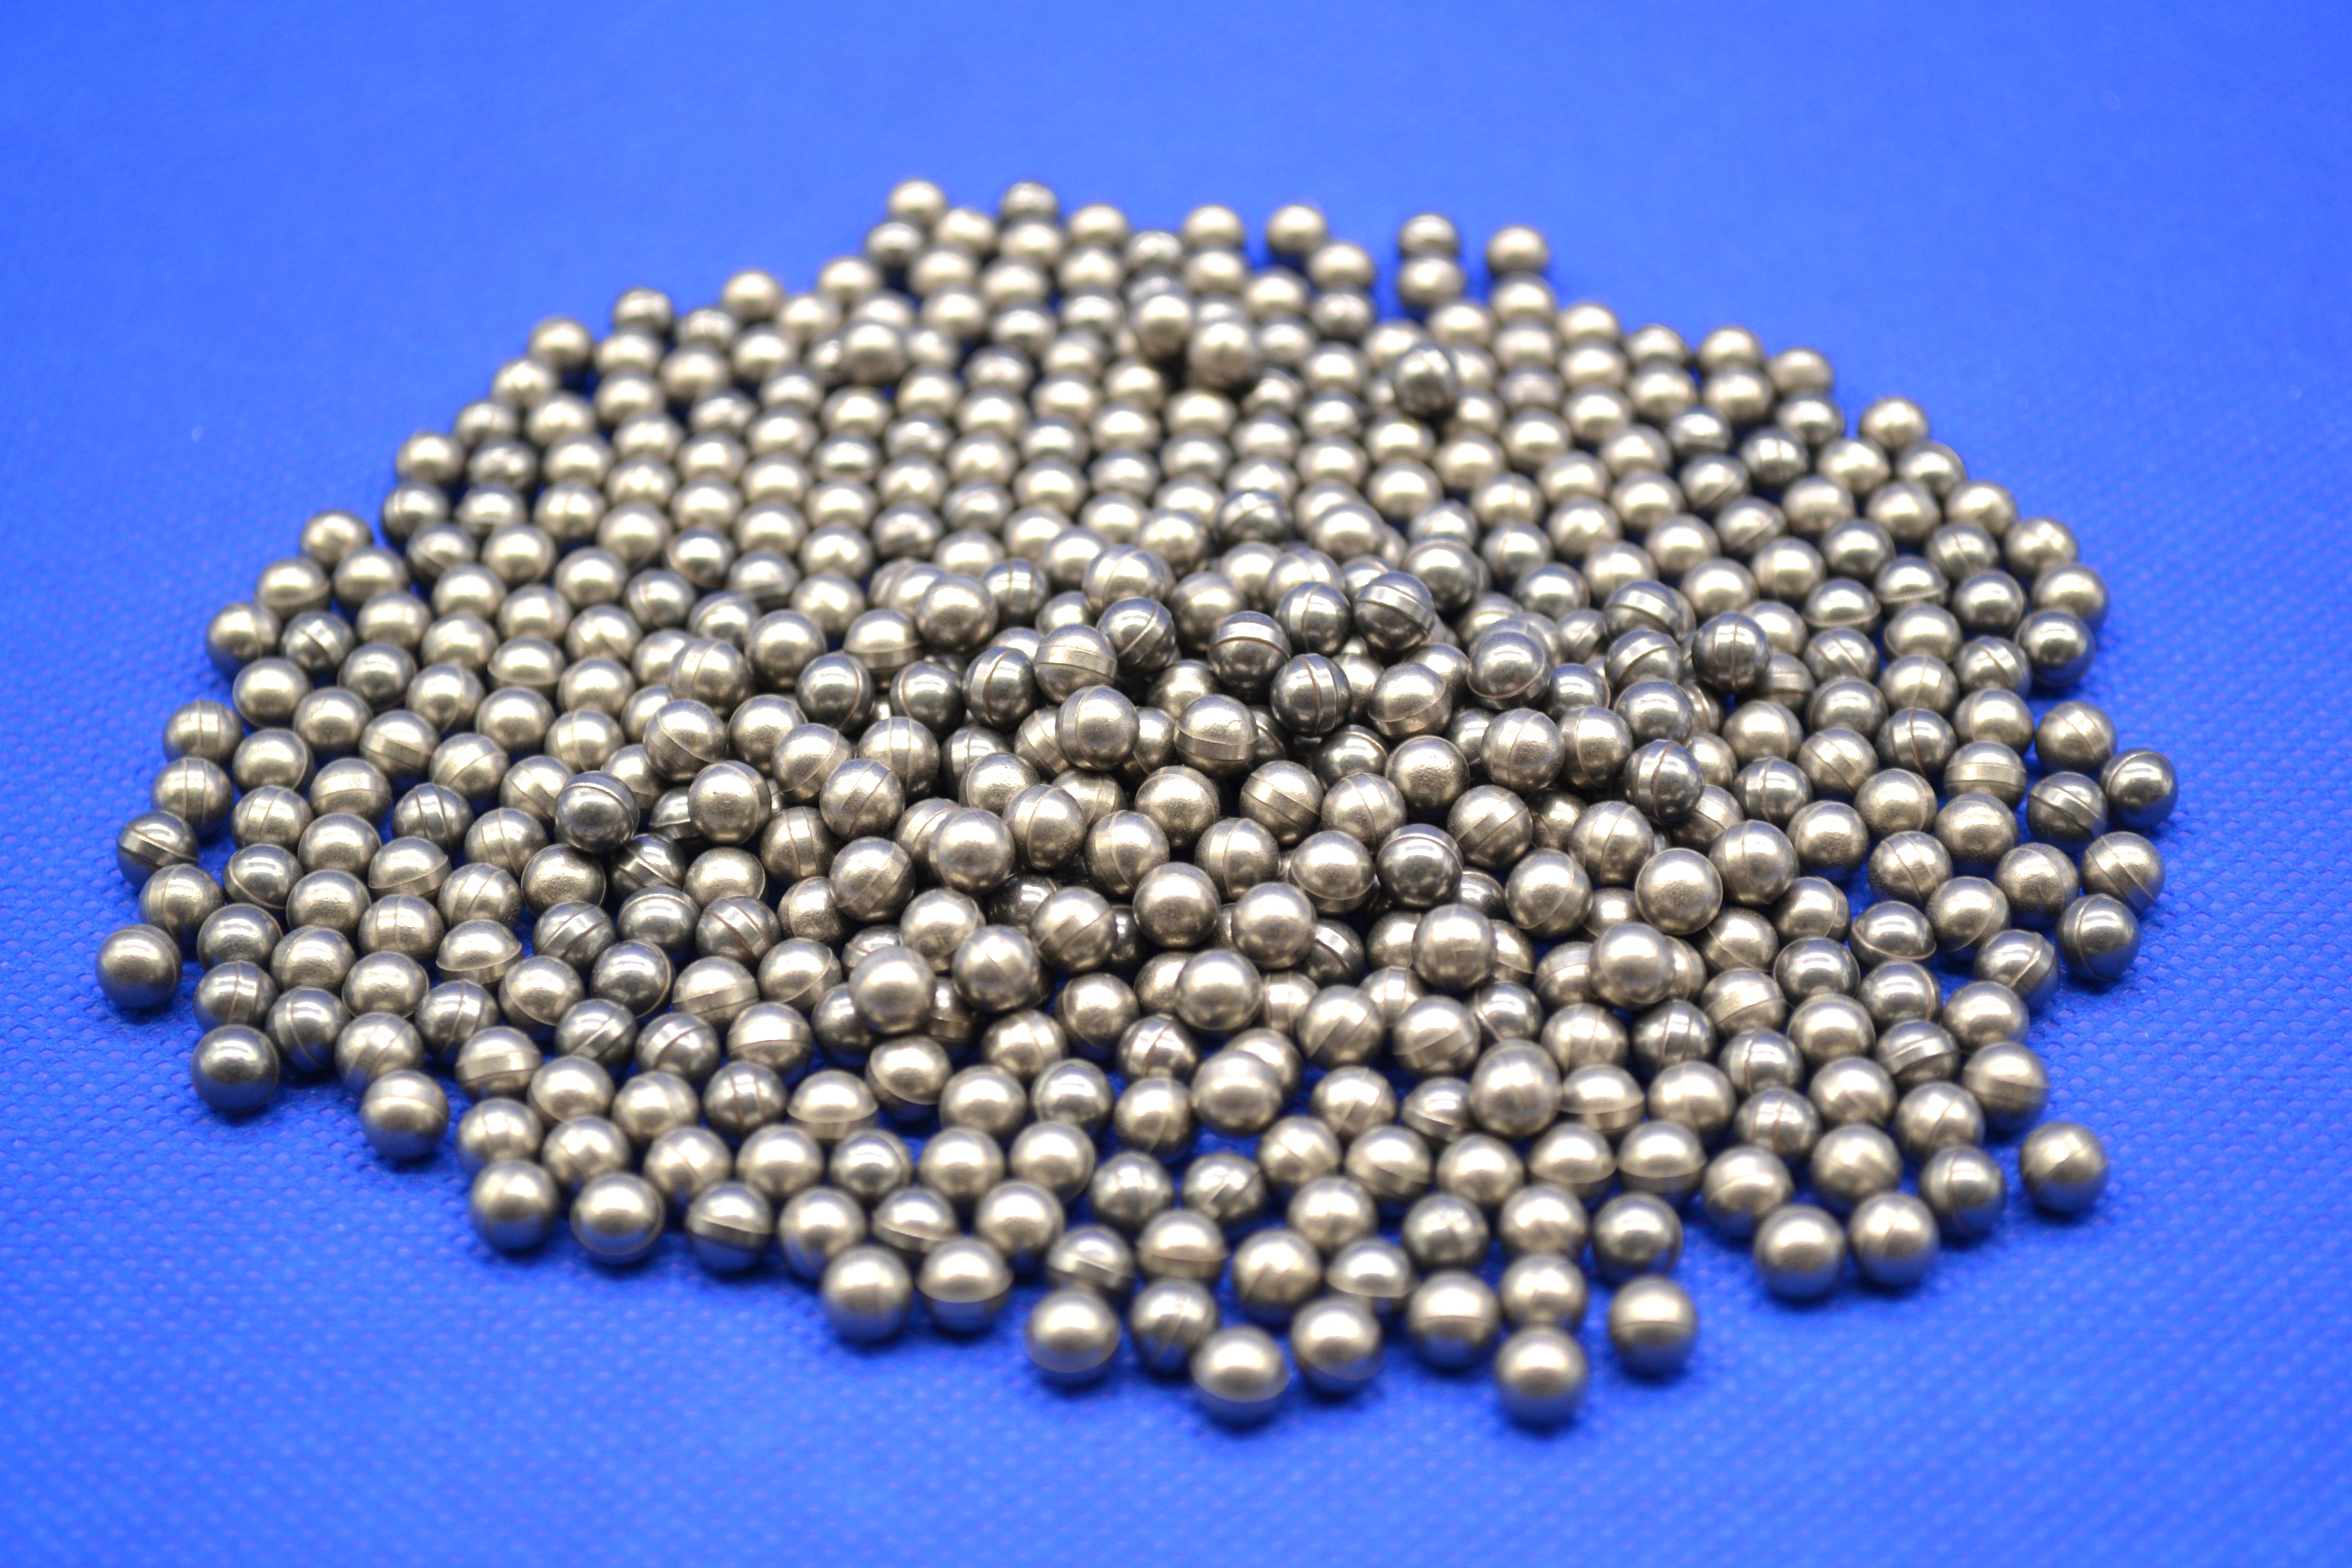 4mm Tungsten Carbide (WC) Balls for Grinding and Milling, 1kg– MSE Supplies  LLC